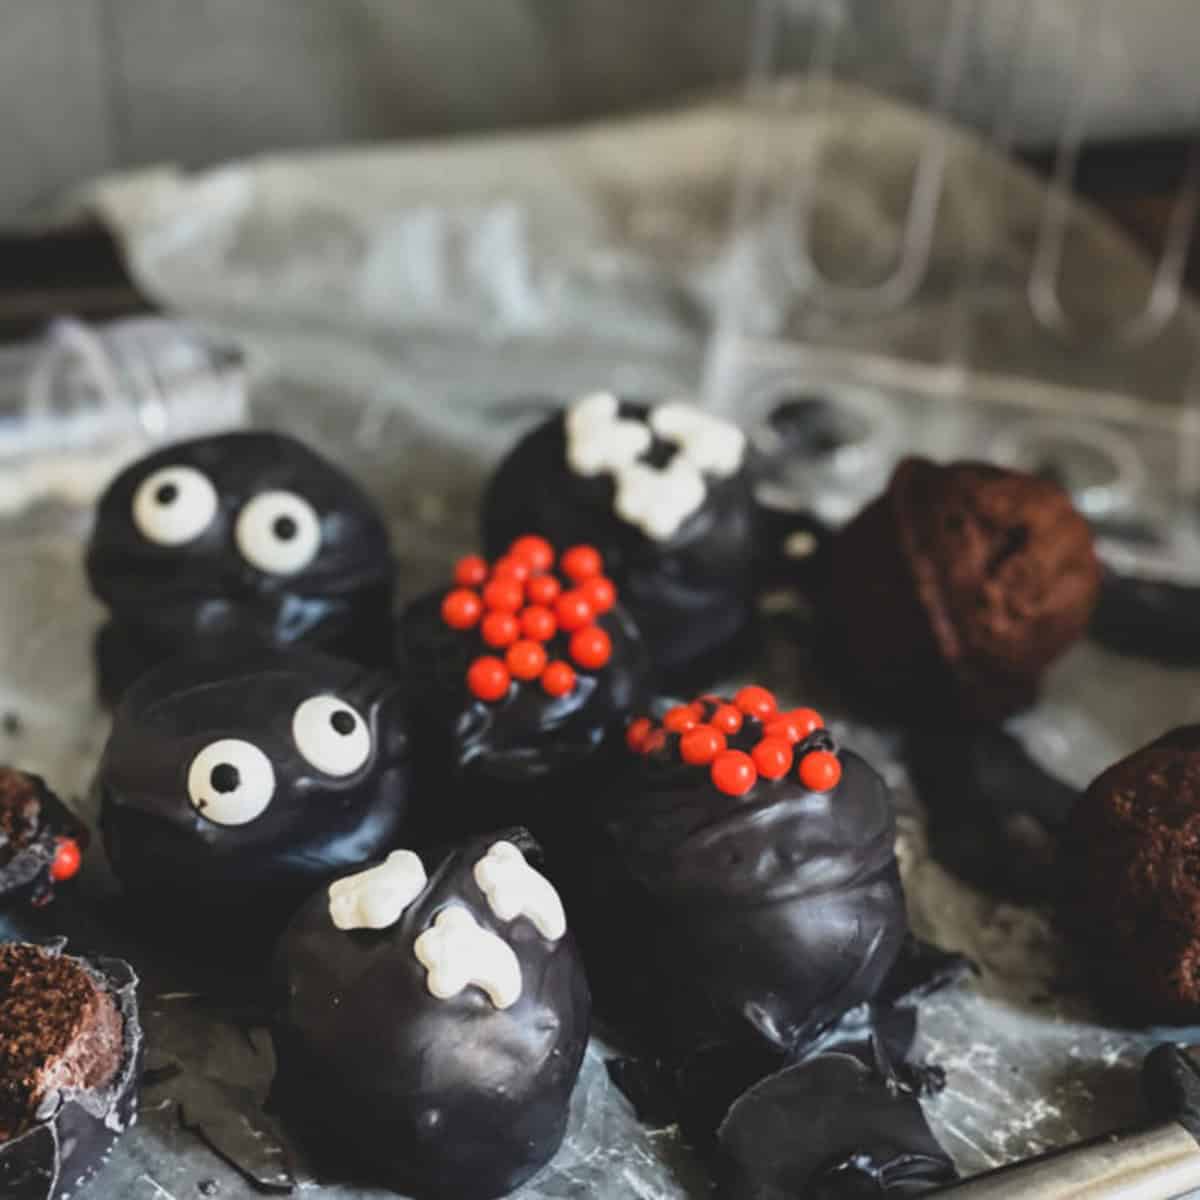 A close-up of a rectangular tray filled with round chocolate truffles. The truffles are decorated for Halloween with colorful sprinkles and some have googly eyes stuck on them. A small silver server sits on the edge of the tray.